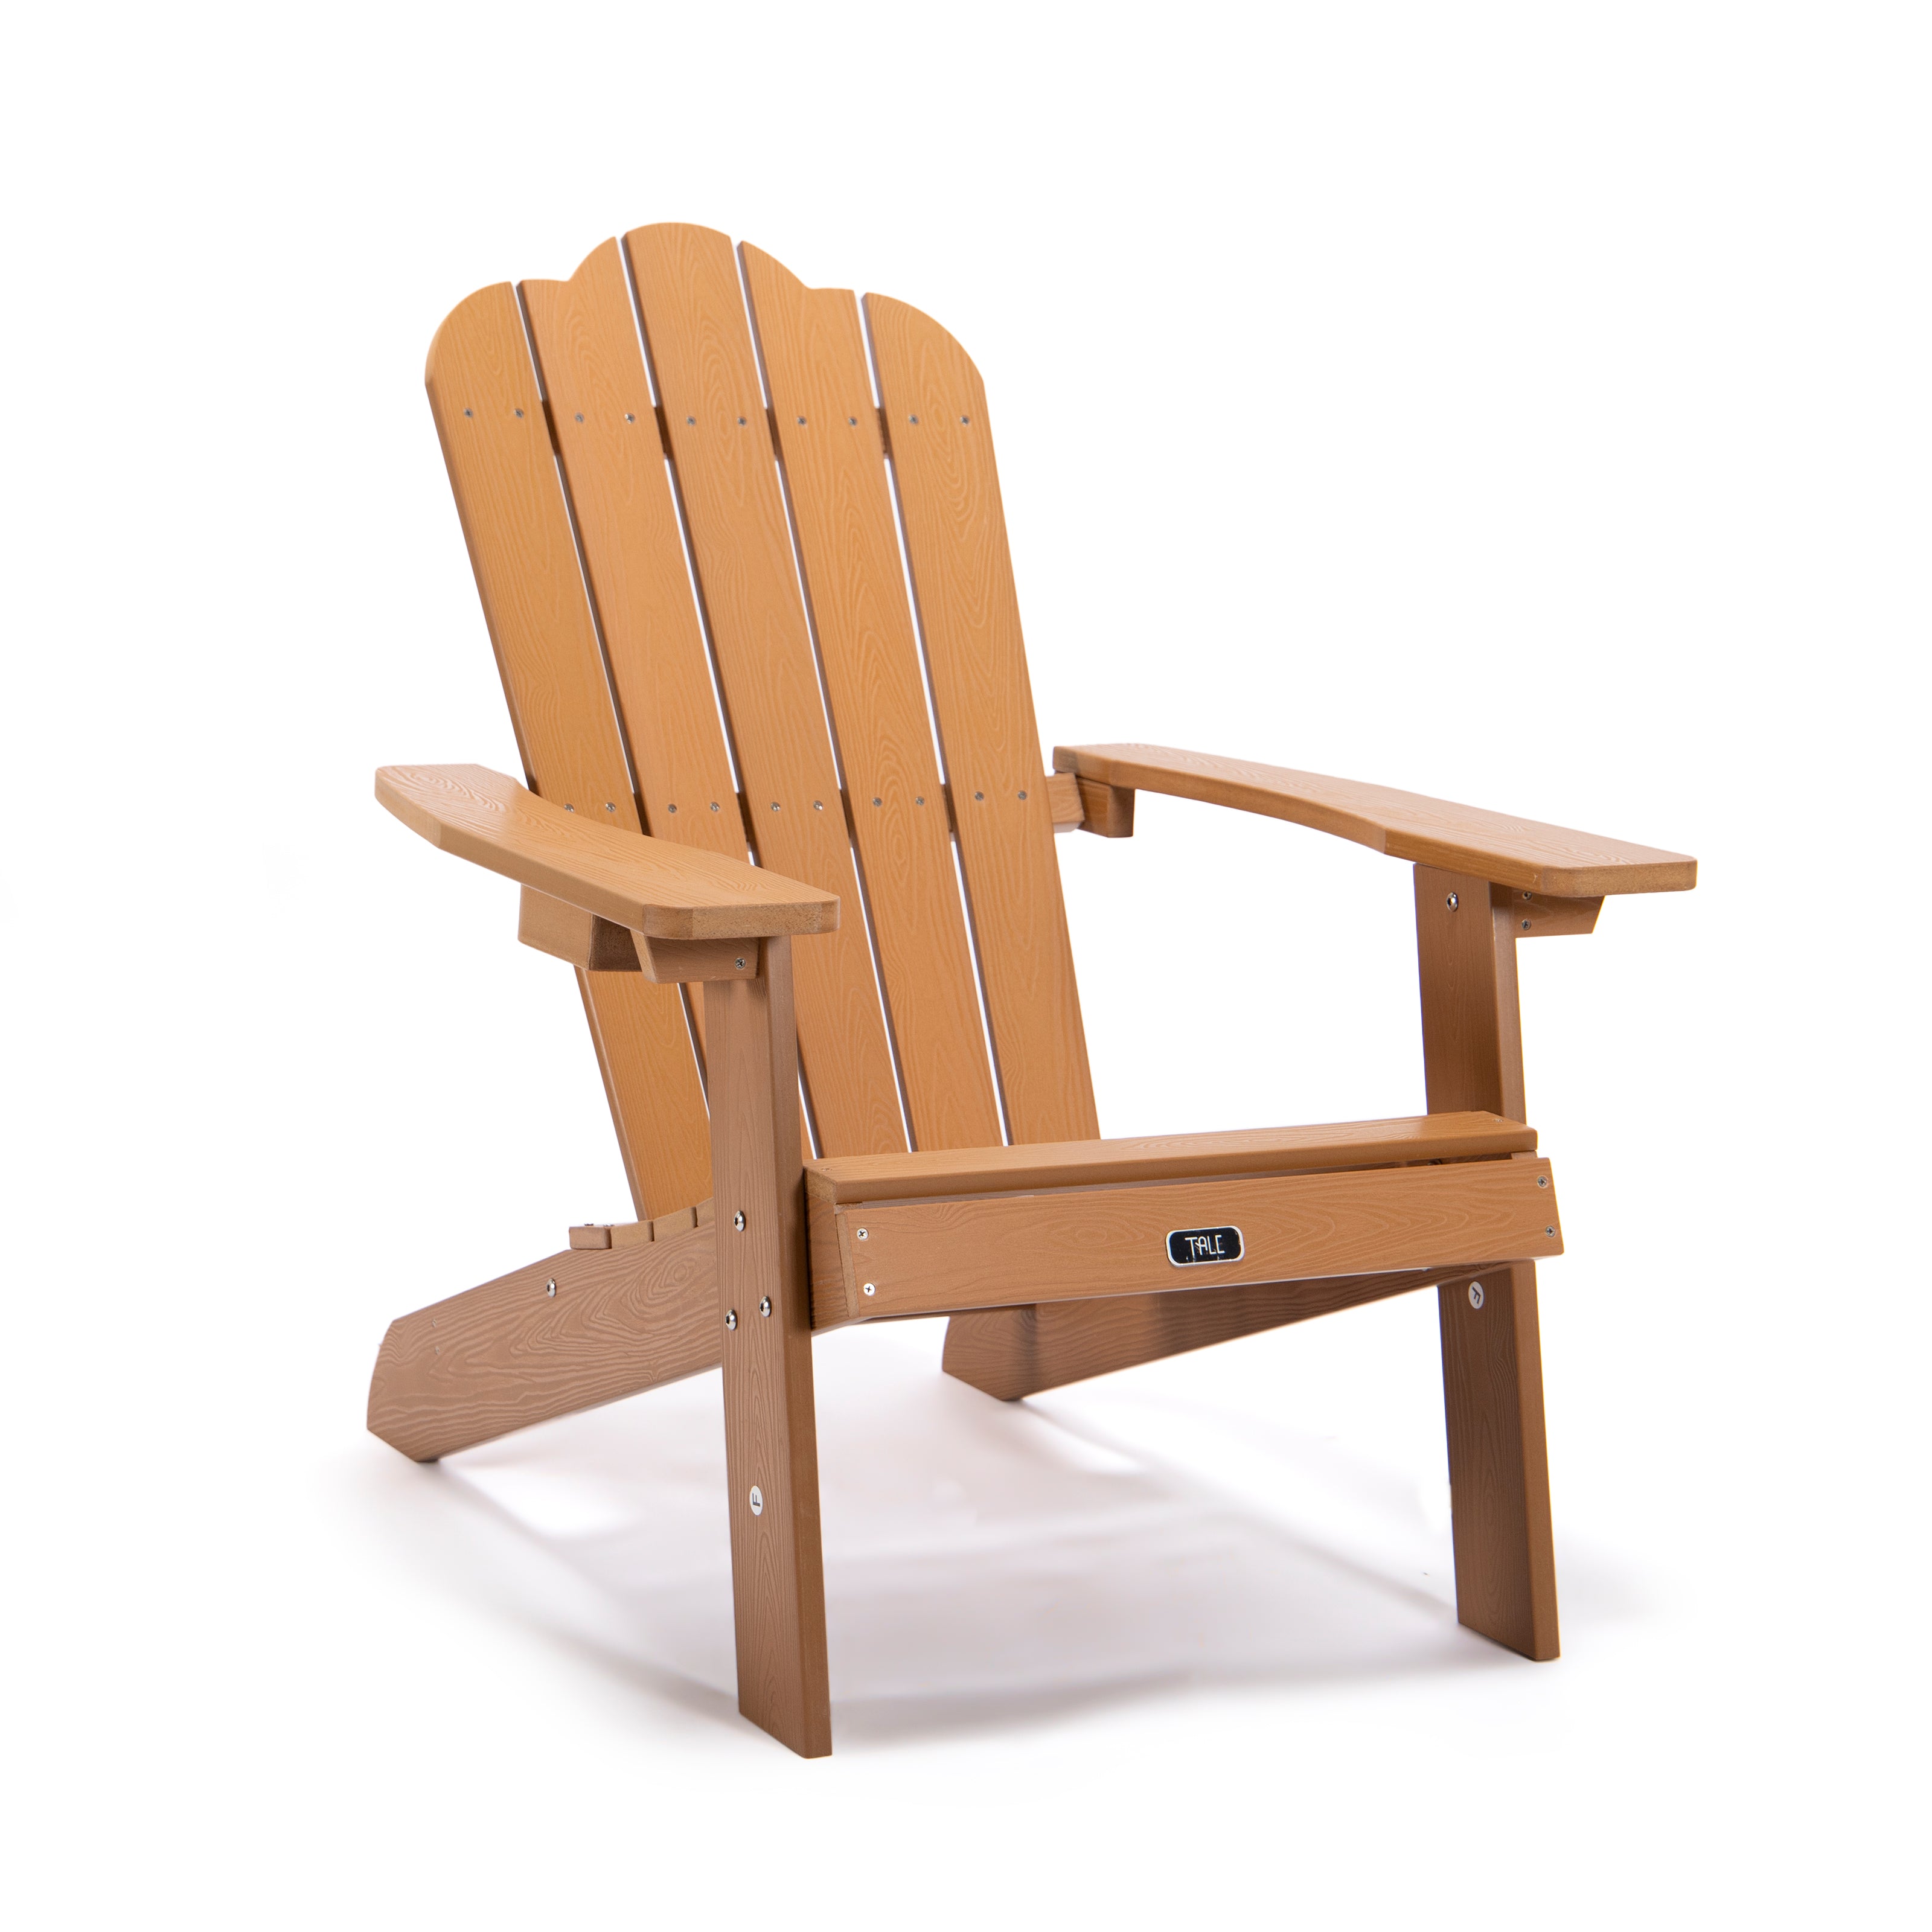 Adirondack Bliss: All-Weather Outdoor Chair with Cup Holder - Durable, Stylish, and Fade-Resistant